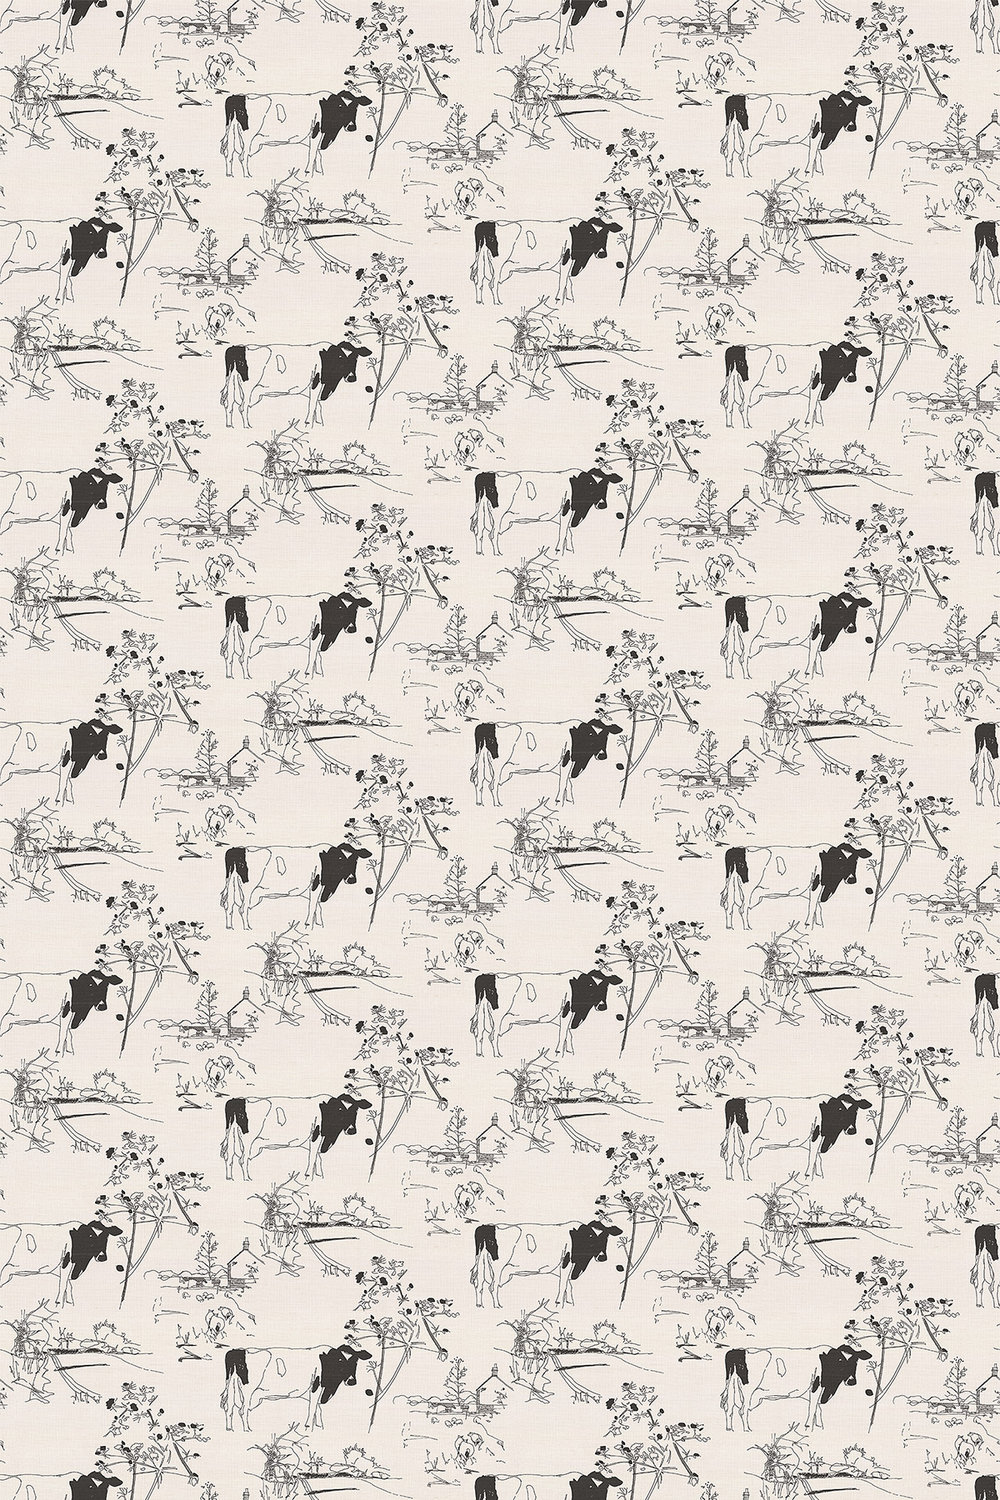 Countryside Toile 01 Fabric - Black / White - by Belynda Sharples